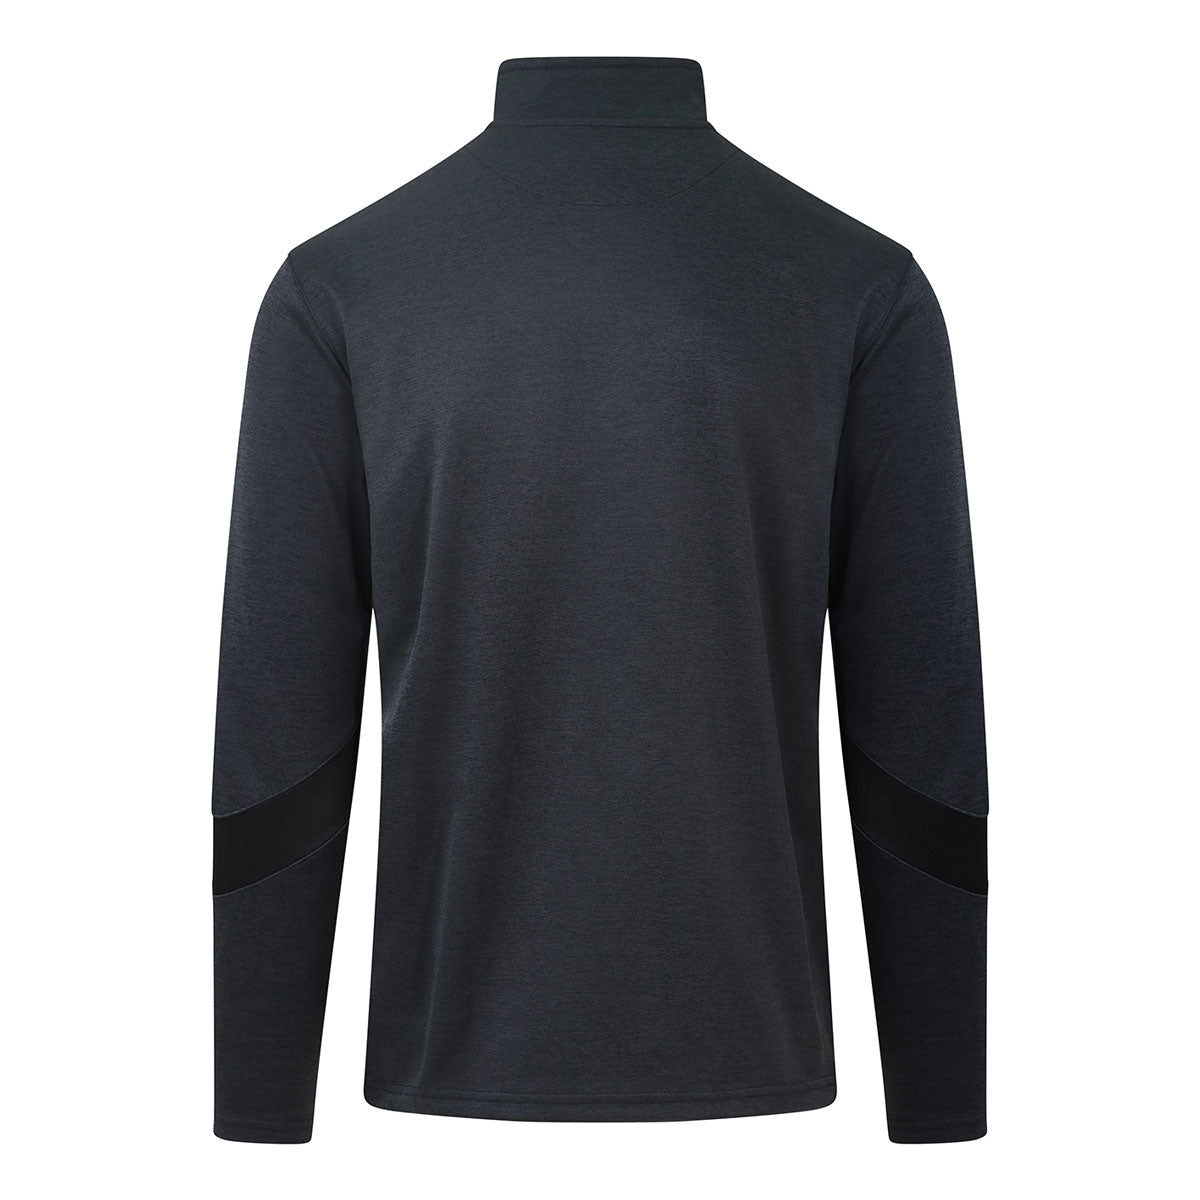 Mc Keever Wolfe Tones Na Sionna, Clare Core 22 1/4 Zip Top - Adult - Black